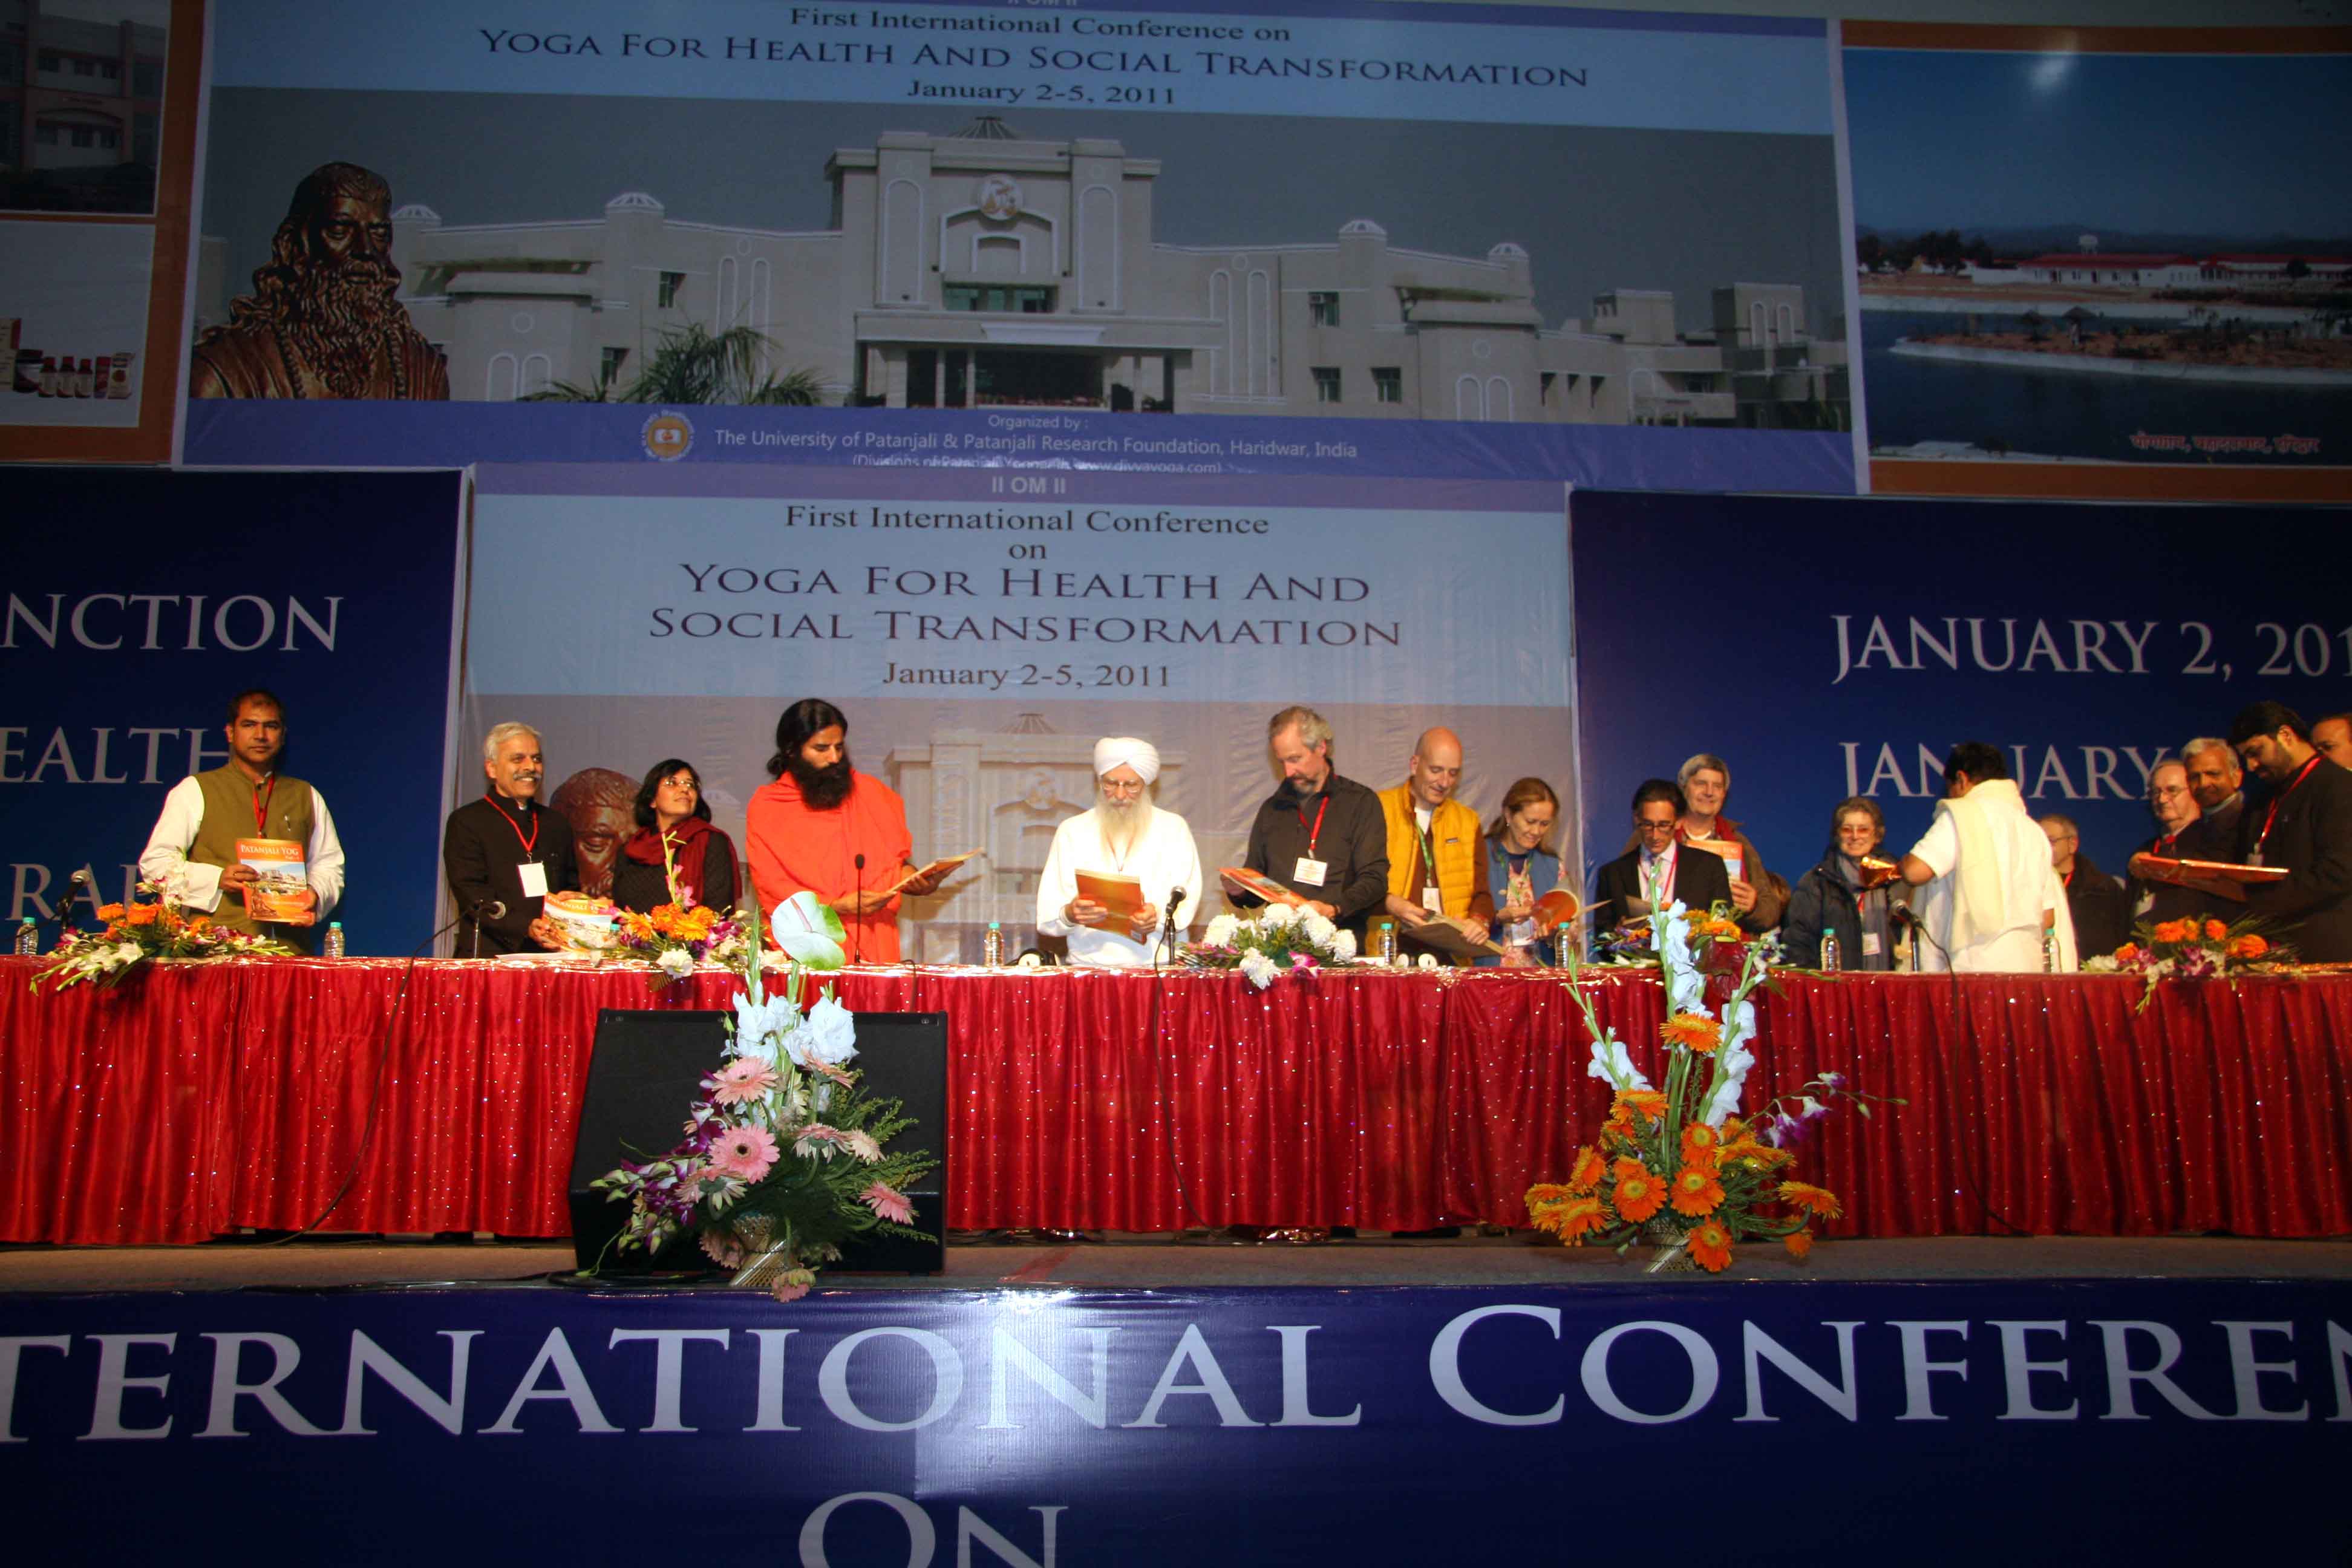 Inaugration cermenony Of the Revised version Of Patanjali Yog Book Part 1 at First International Conference